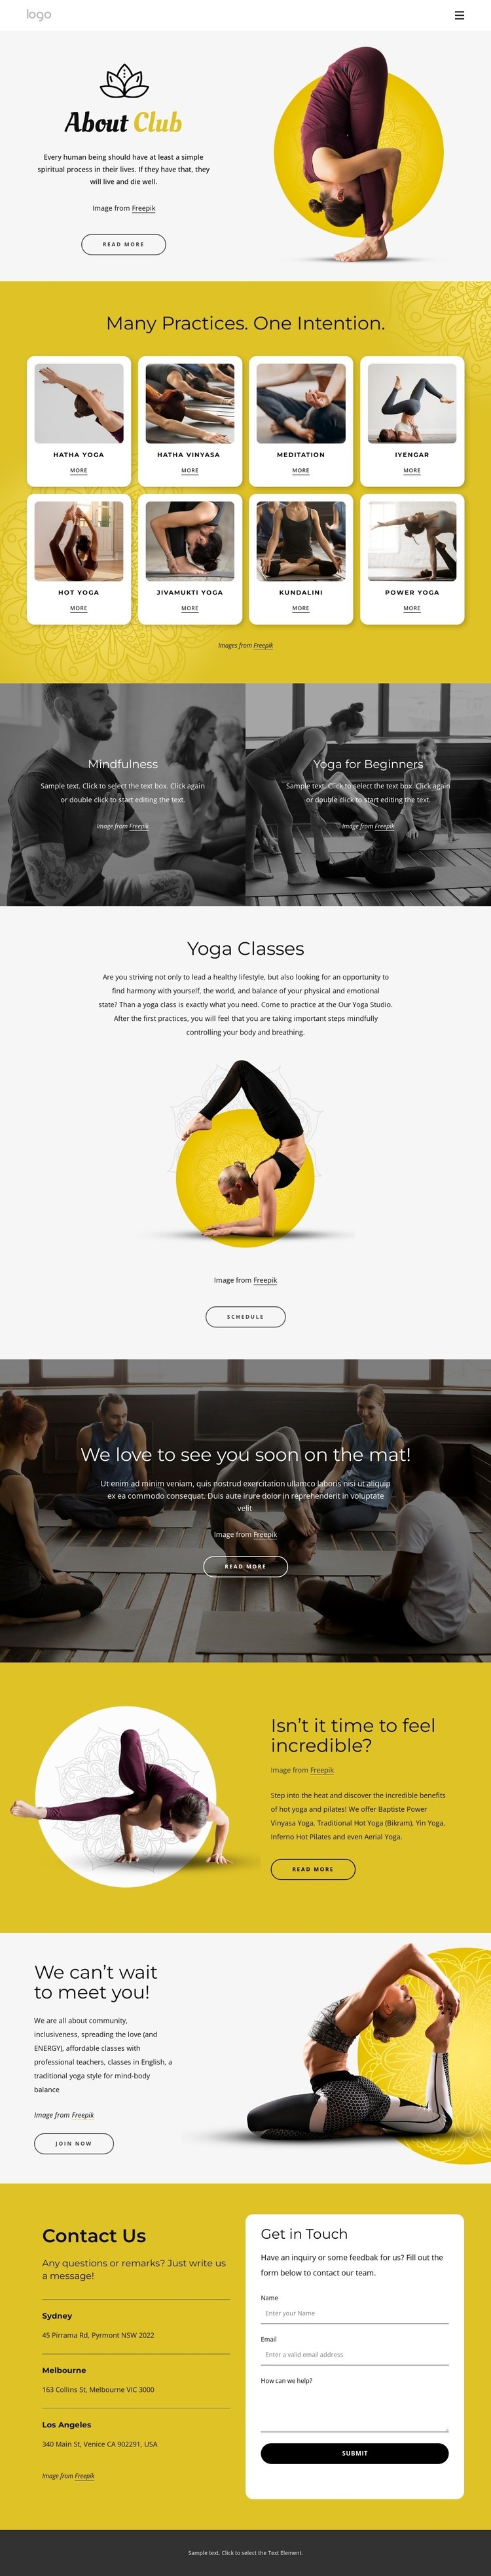 Physical, ethical and spiritual practice Web Page Design